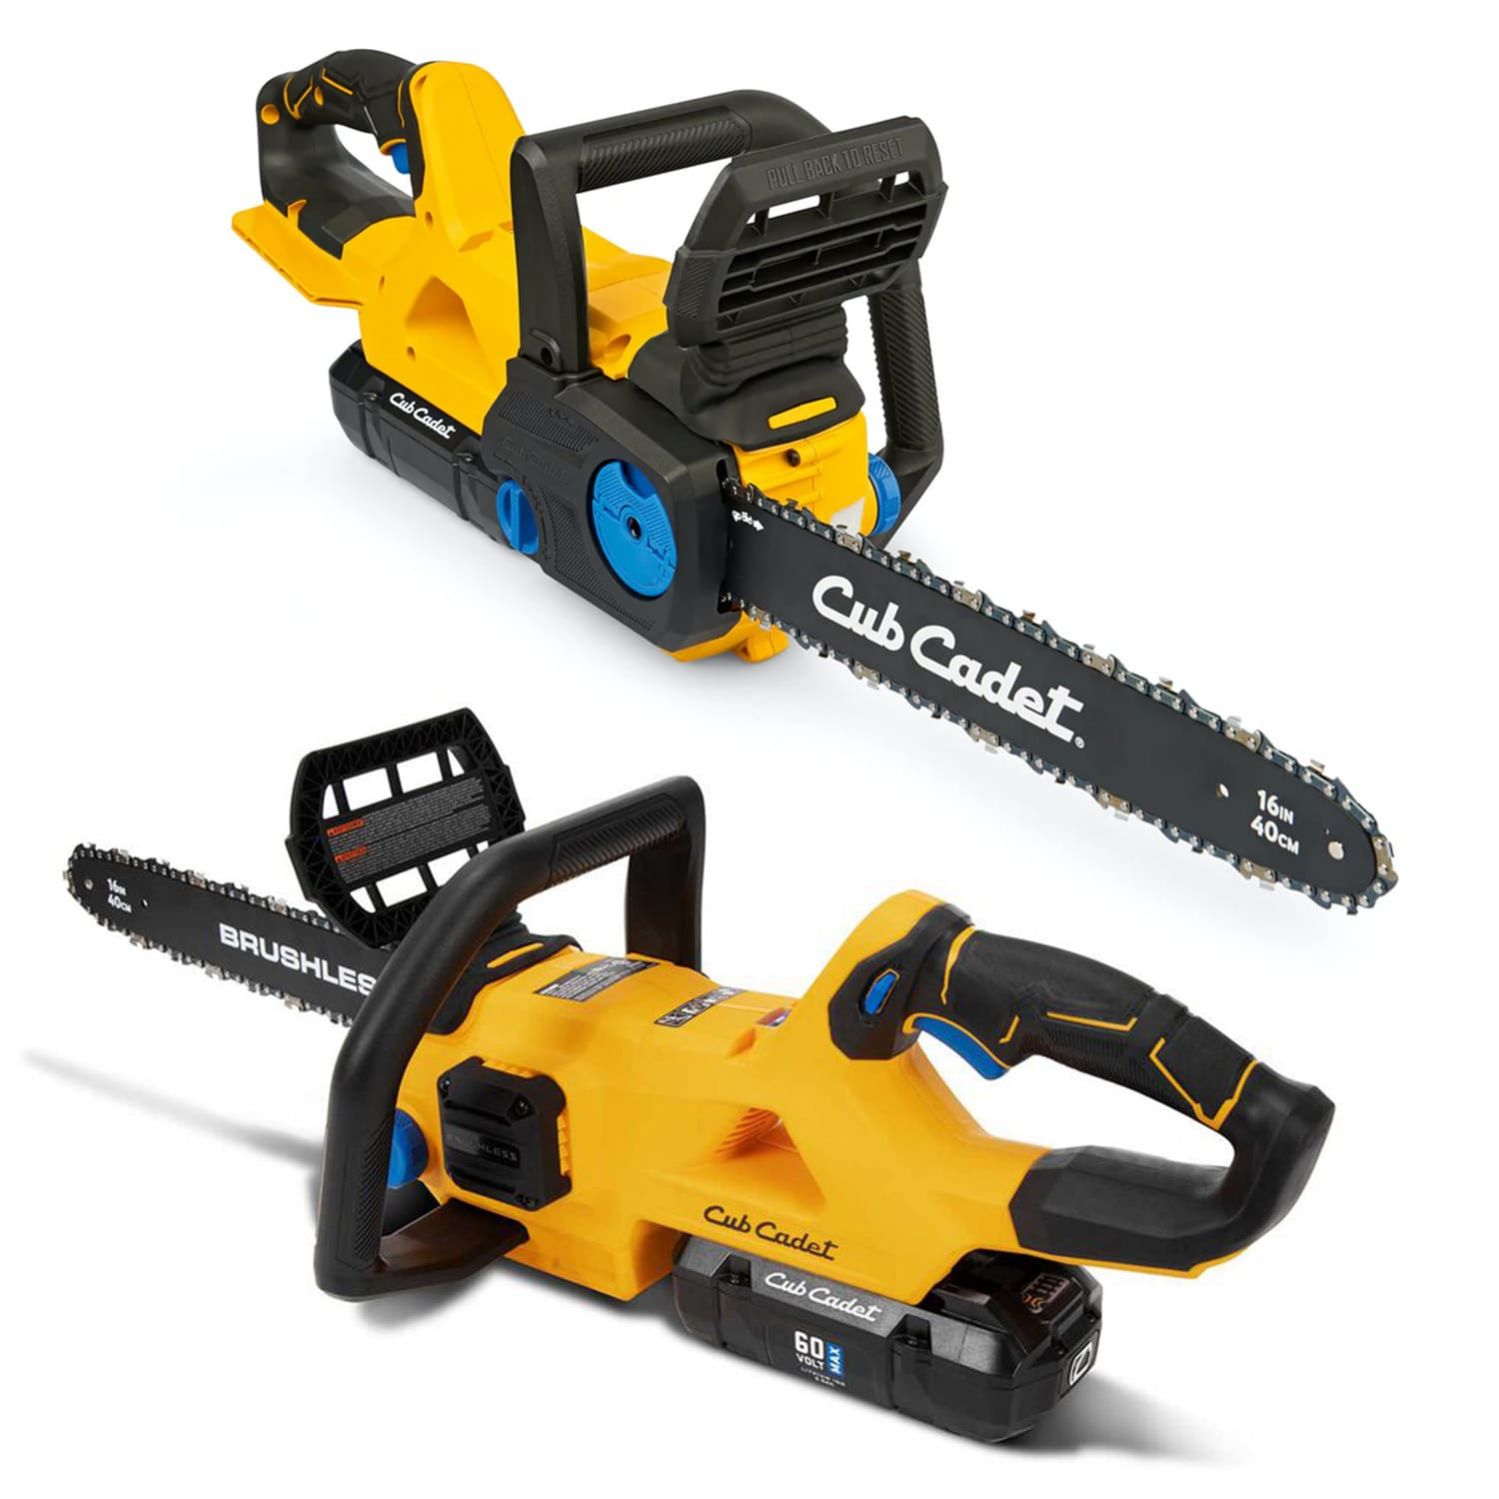 Cub Cadet Battery Chain saw (LH5 C60 with 2.5 Ah battery and charger)